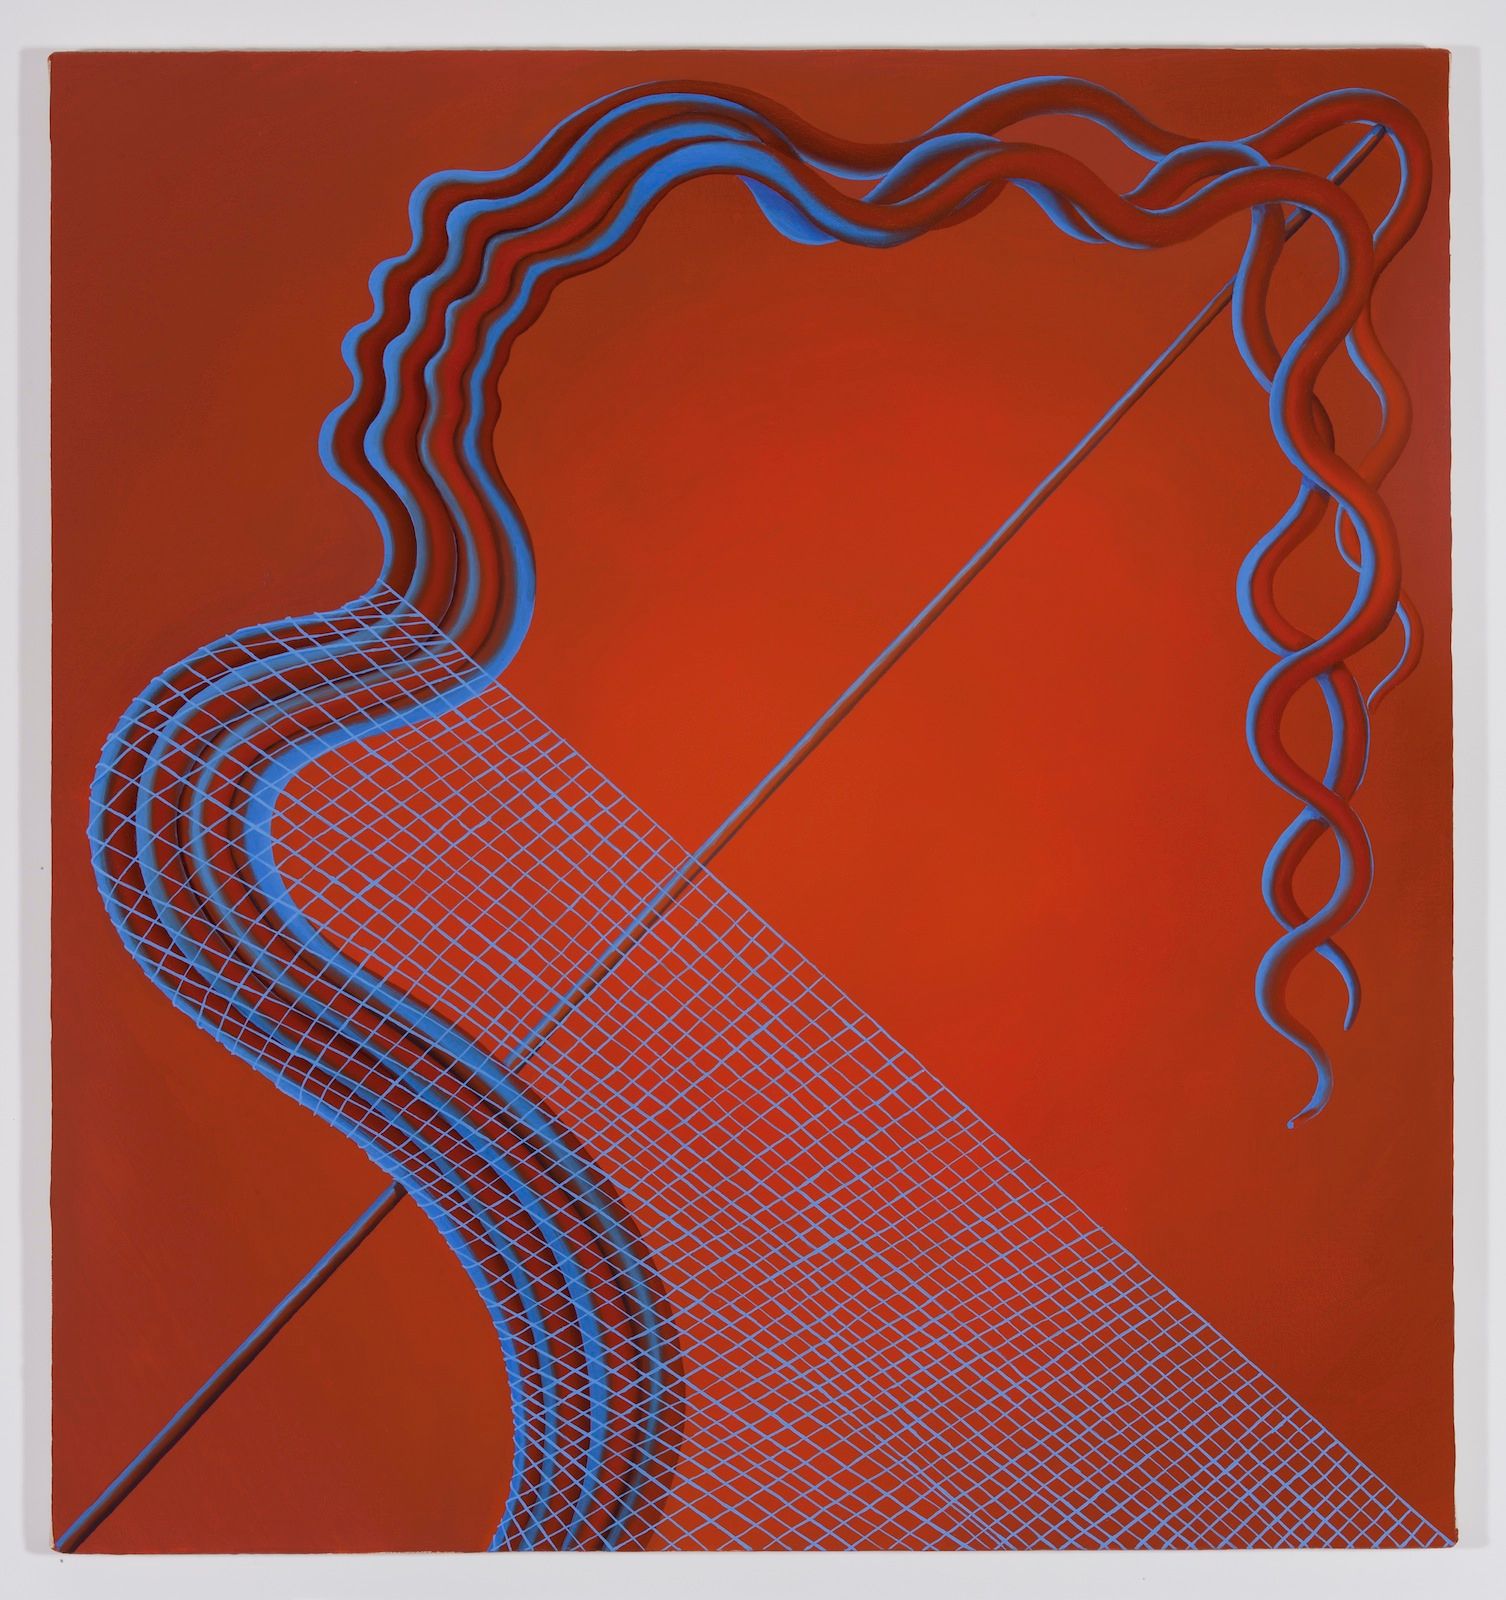 Sascha Braunig, Prowess, 2013, oil on canvas, 29 × 27 in.